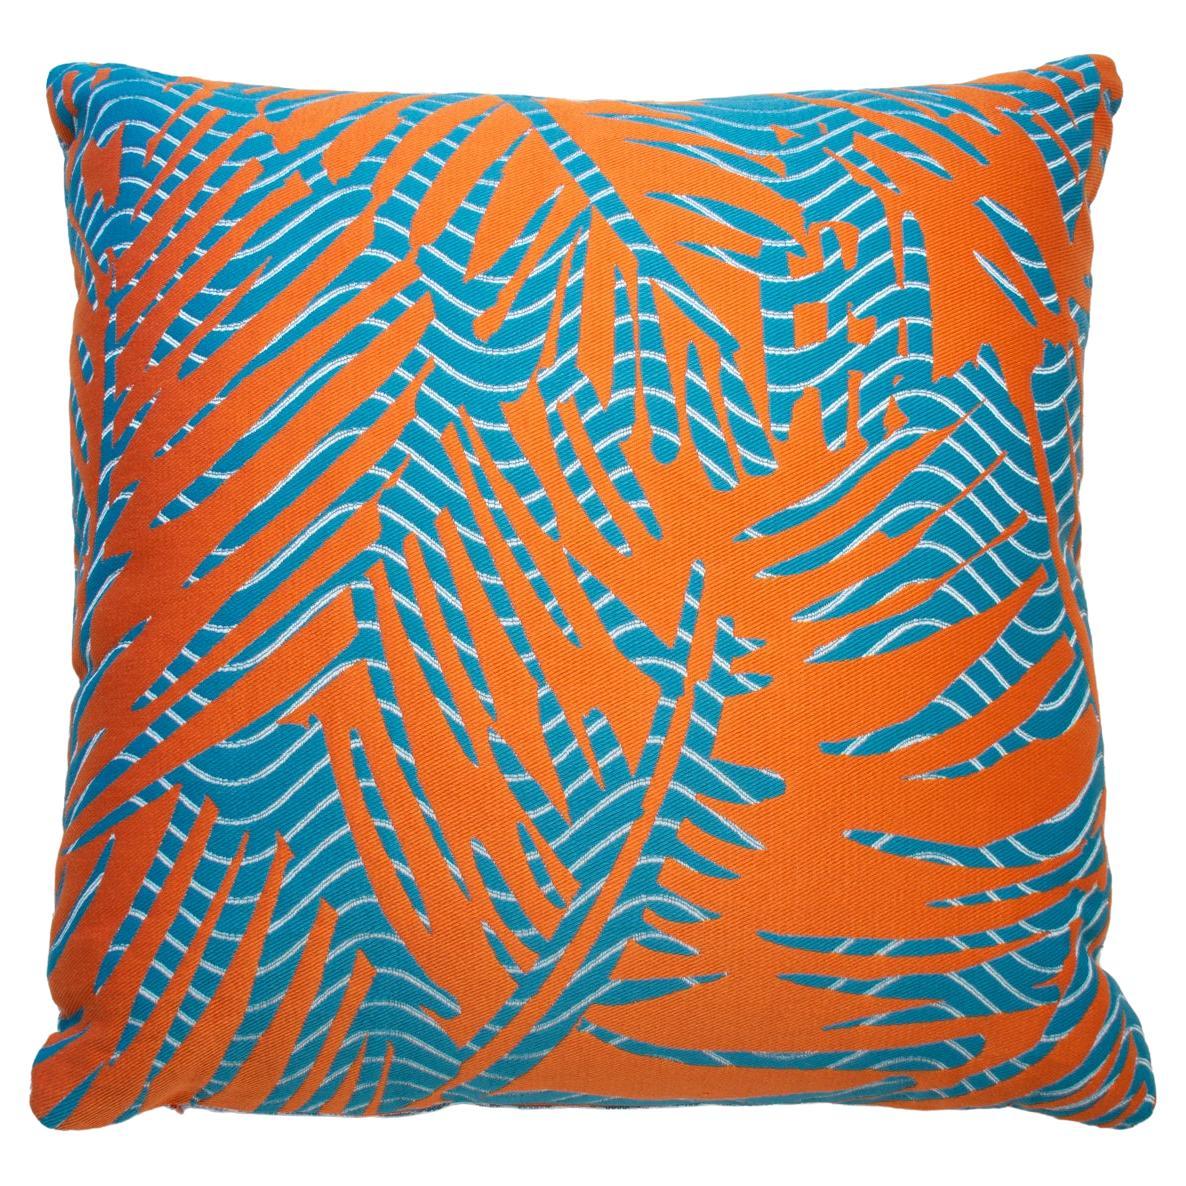 Hermes Pillow Feuillage Vague in Orange, Navy Backing For Sale